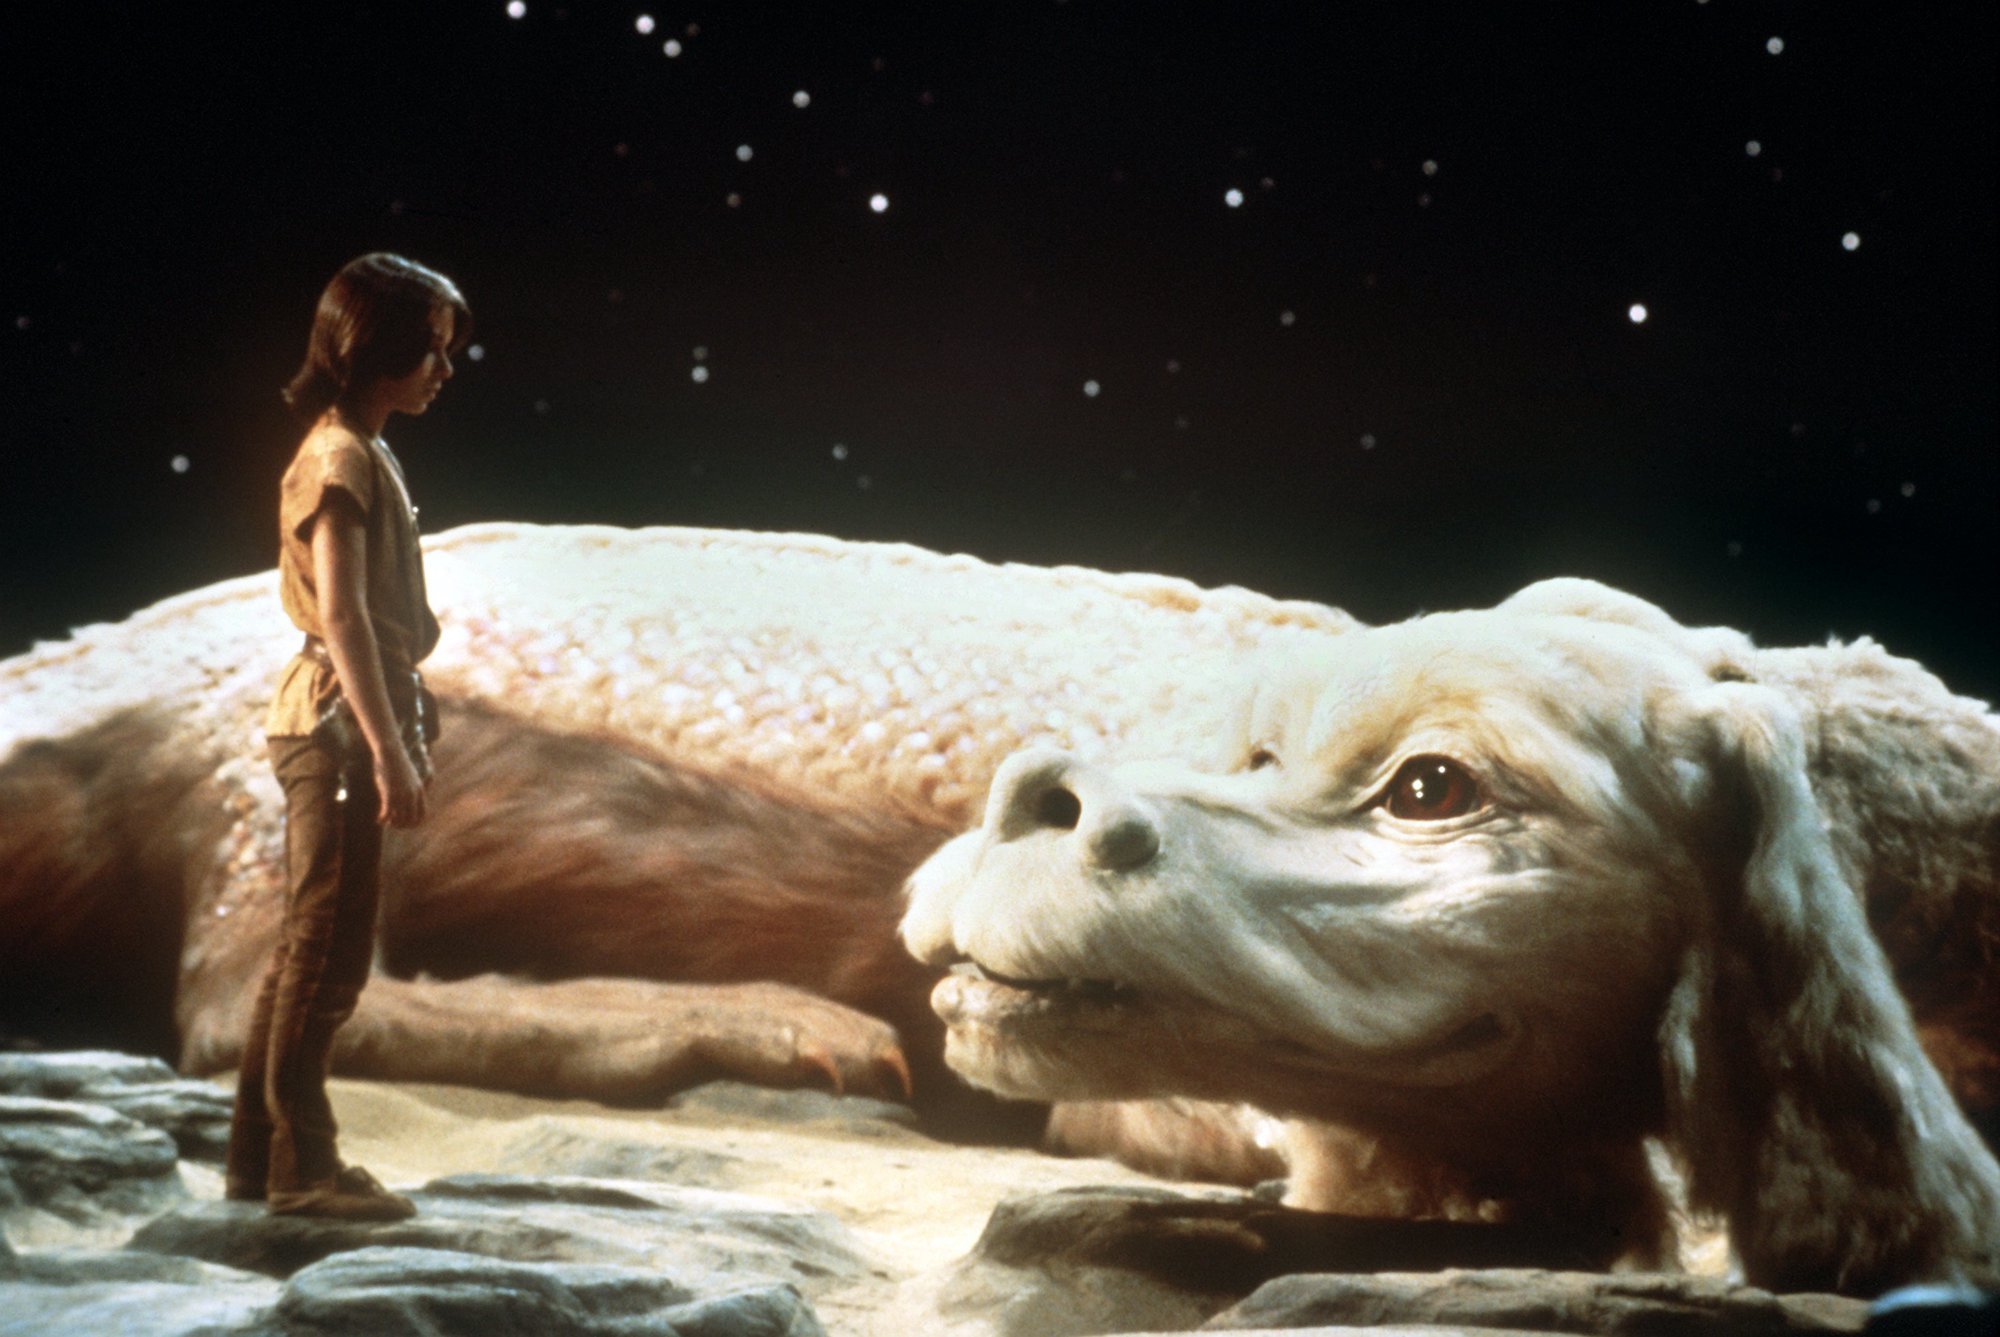 Noah Hathaway as Atreju with the white dragon from 'The NeverEnding Story'